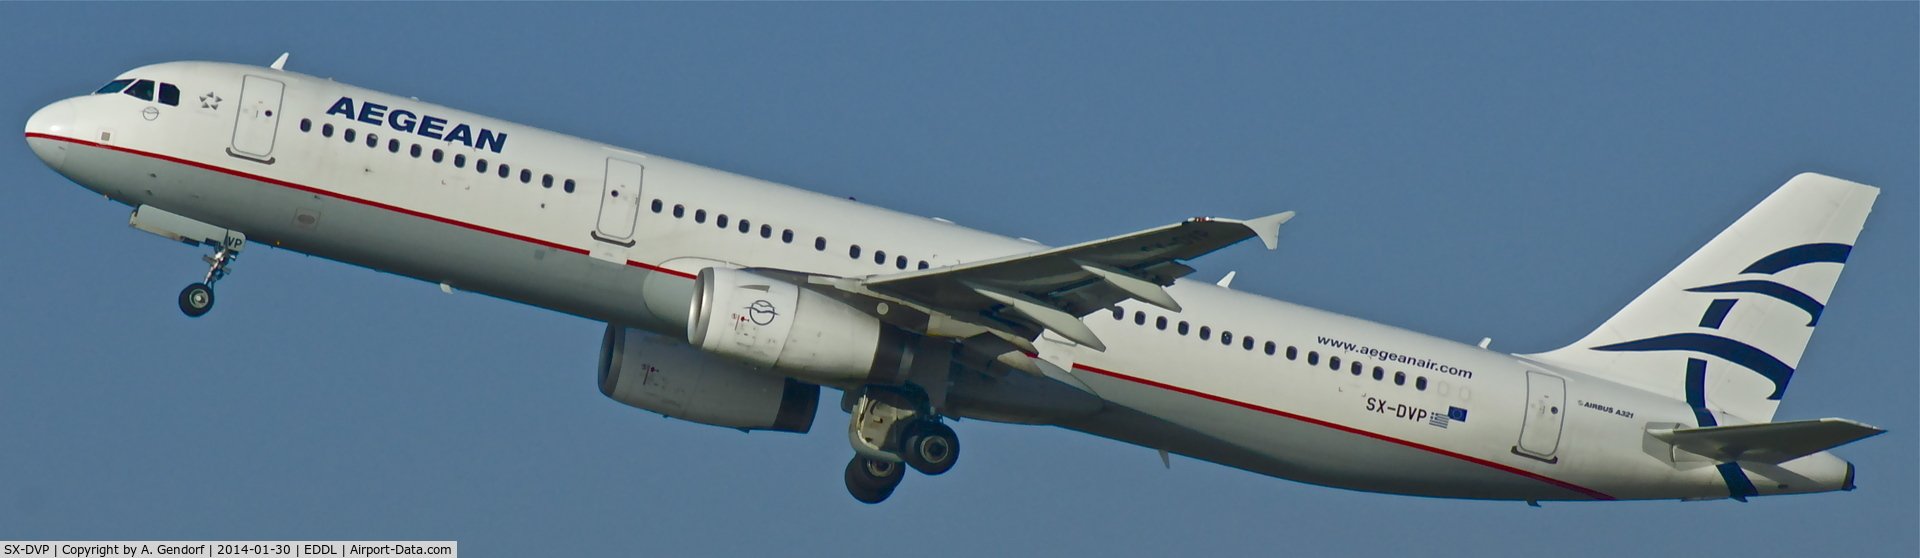 SX-DVP, 2008 Airbus A321-232 C/N 3527, Aegean Airlines, is here climbing out at Düsseldorf Int'l(EDDL)